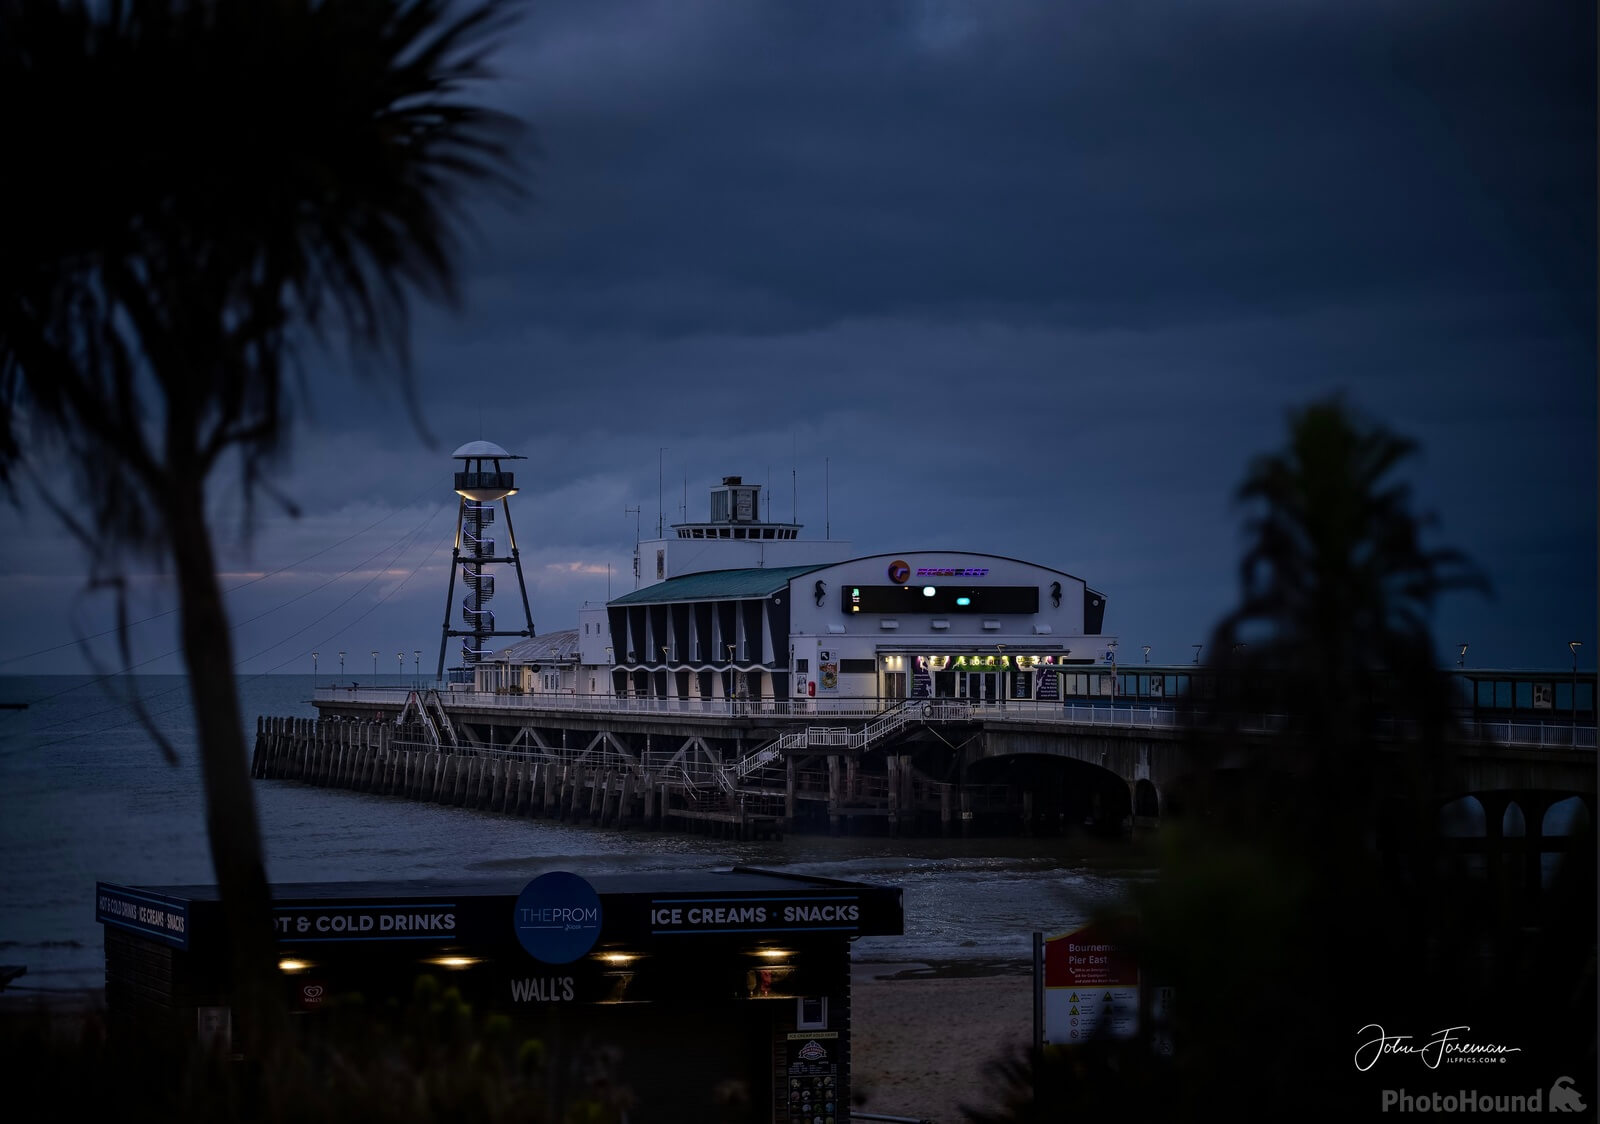 Image of Bournemouth Pier by John Foreman